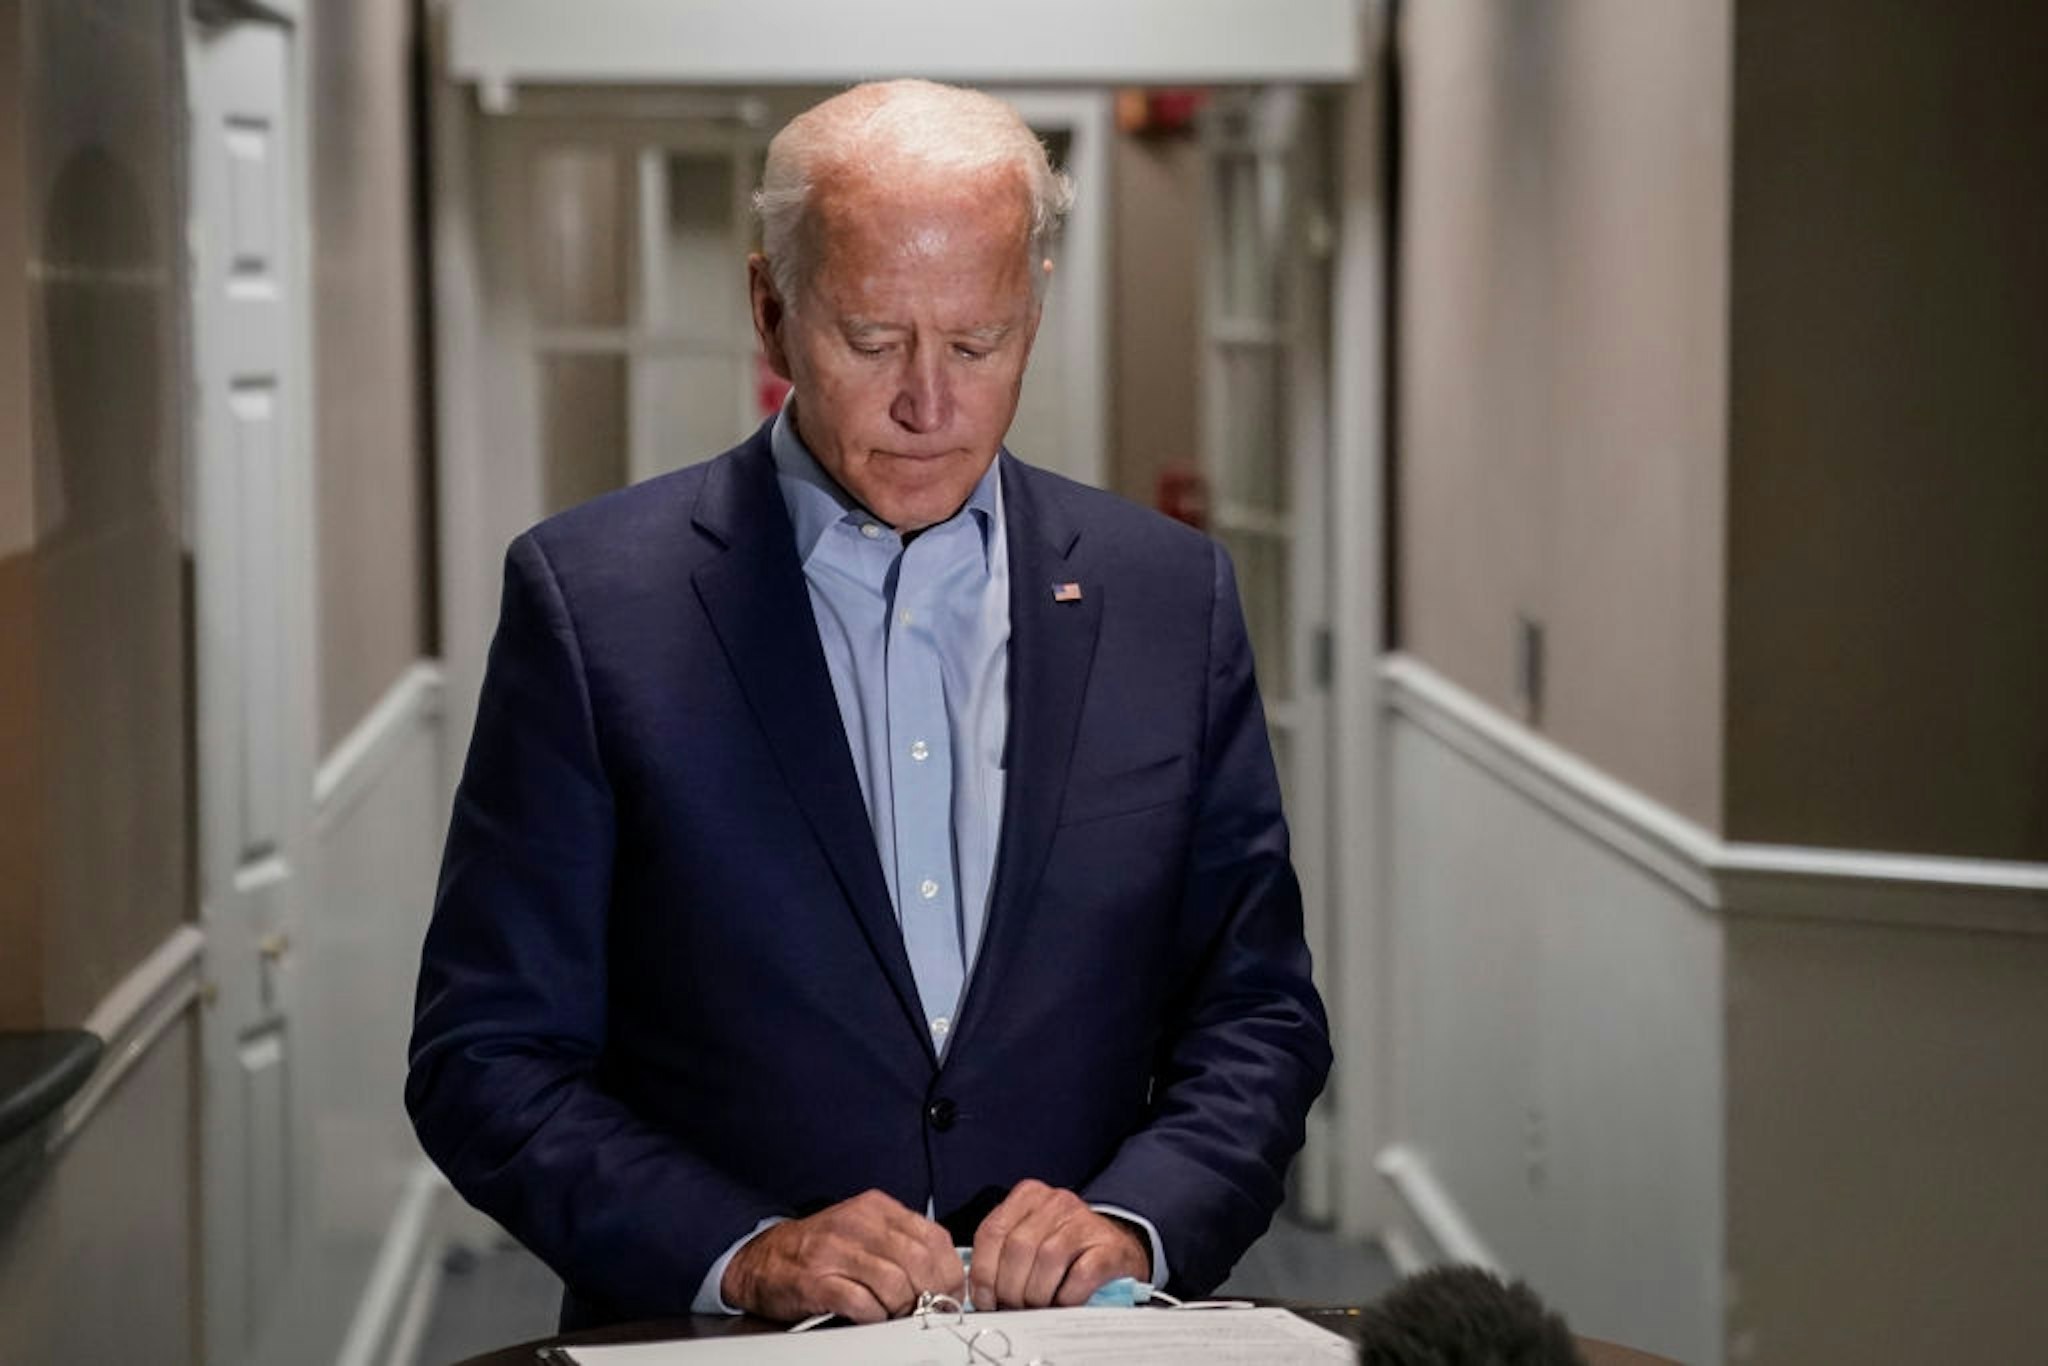 Democratic presidential nominee and former Vice President Joe Biden speaks to reporters about the passing of Supreme Court Justice Ruth Bader Ginsburg upon arrival at New Castle County Airport after a trip to Duluth, Minnesota on September 18, 2020 in New Castle, Delaware.